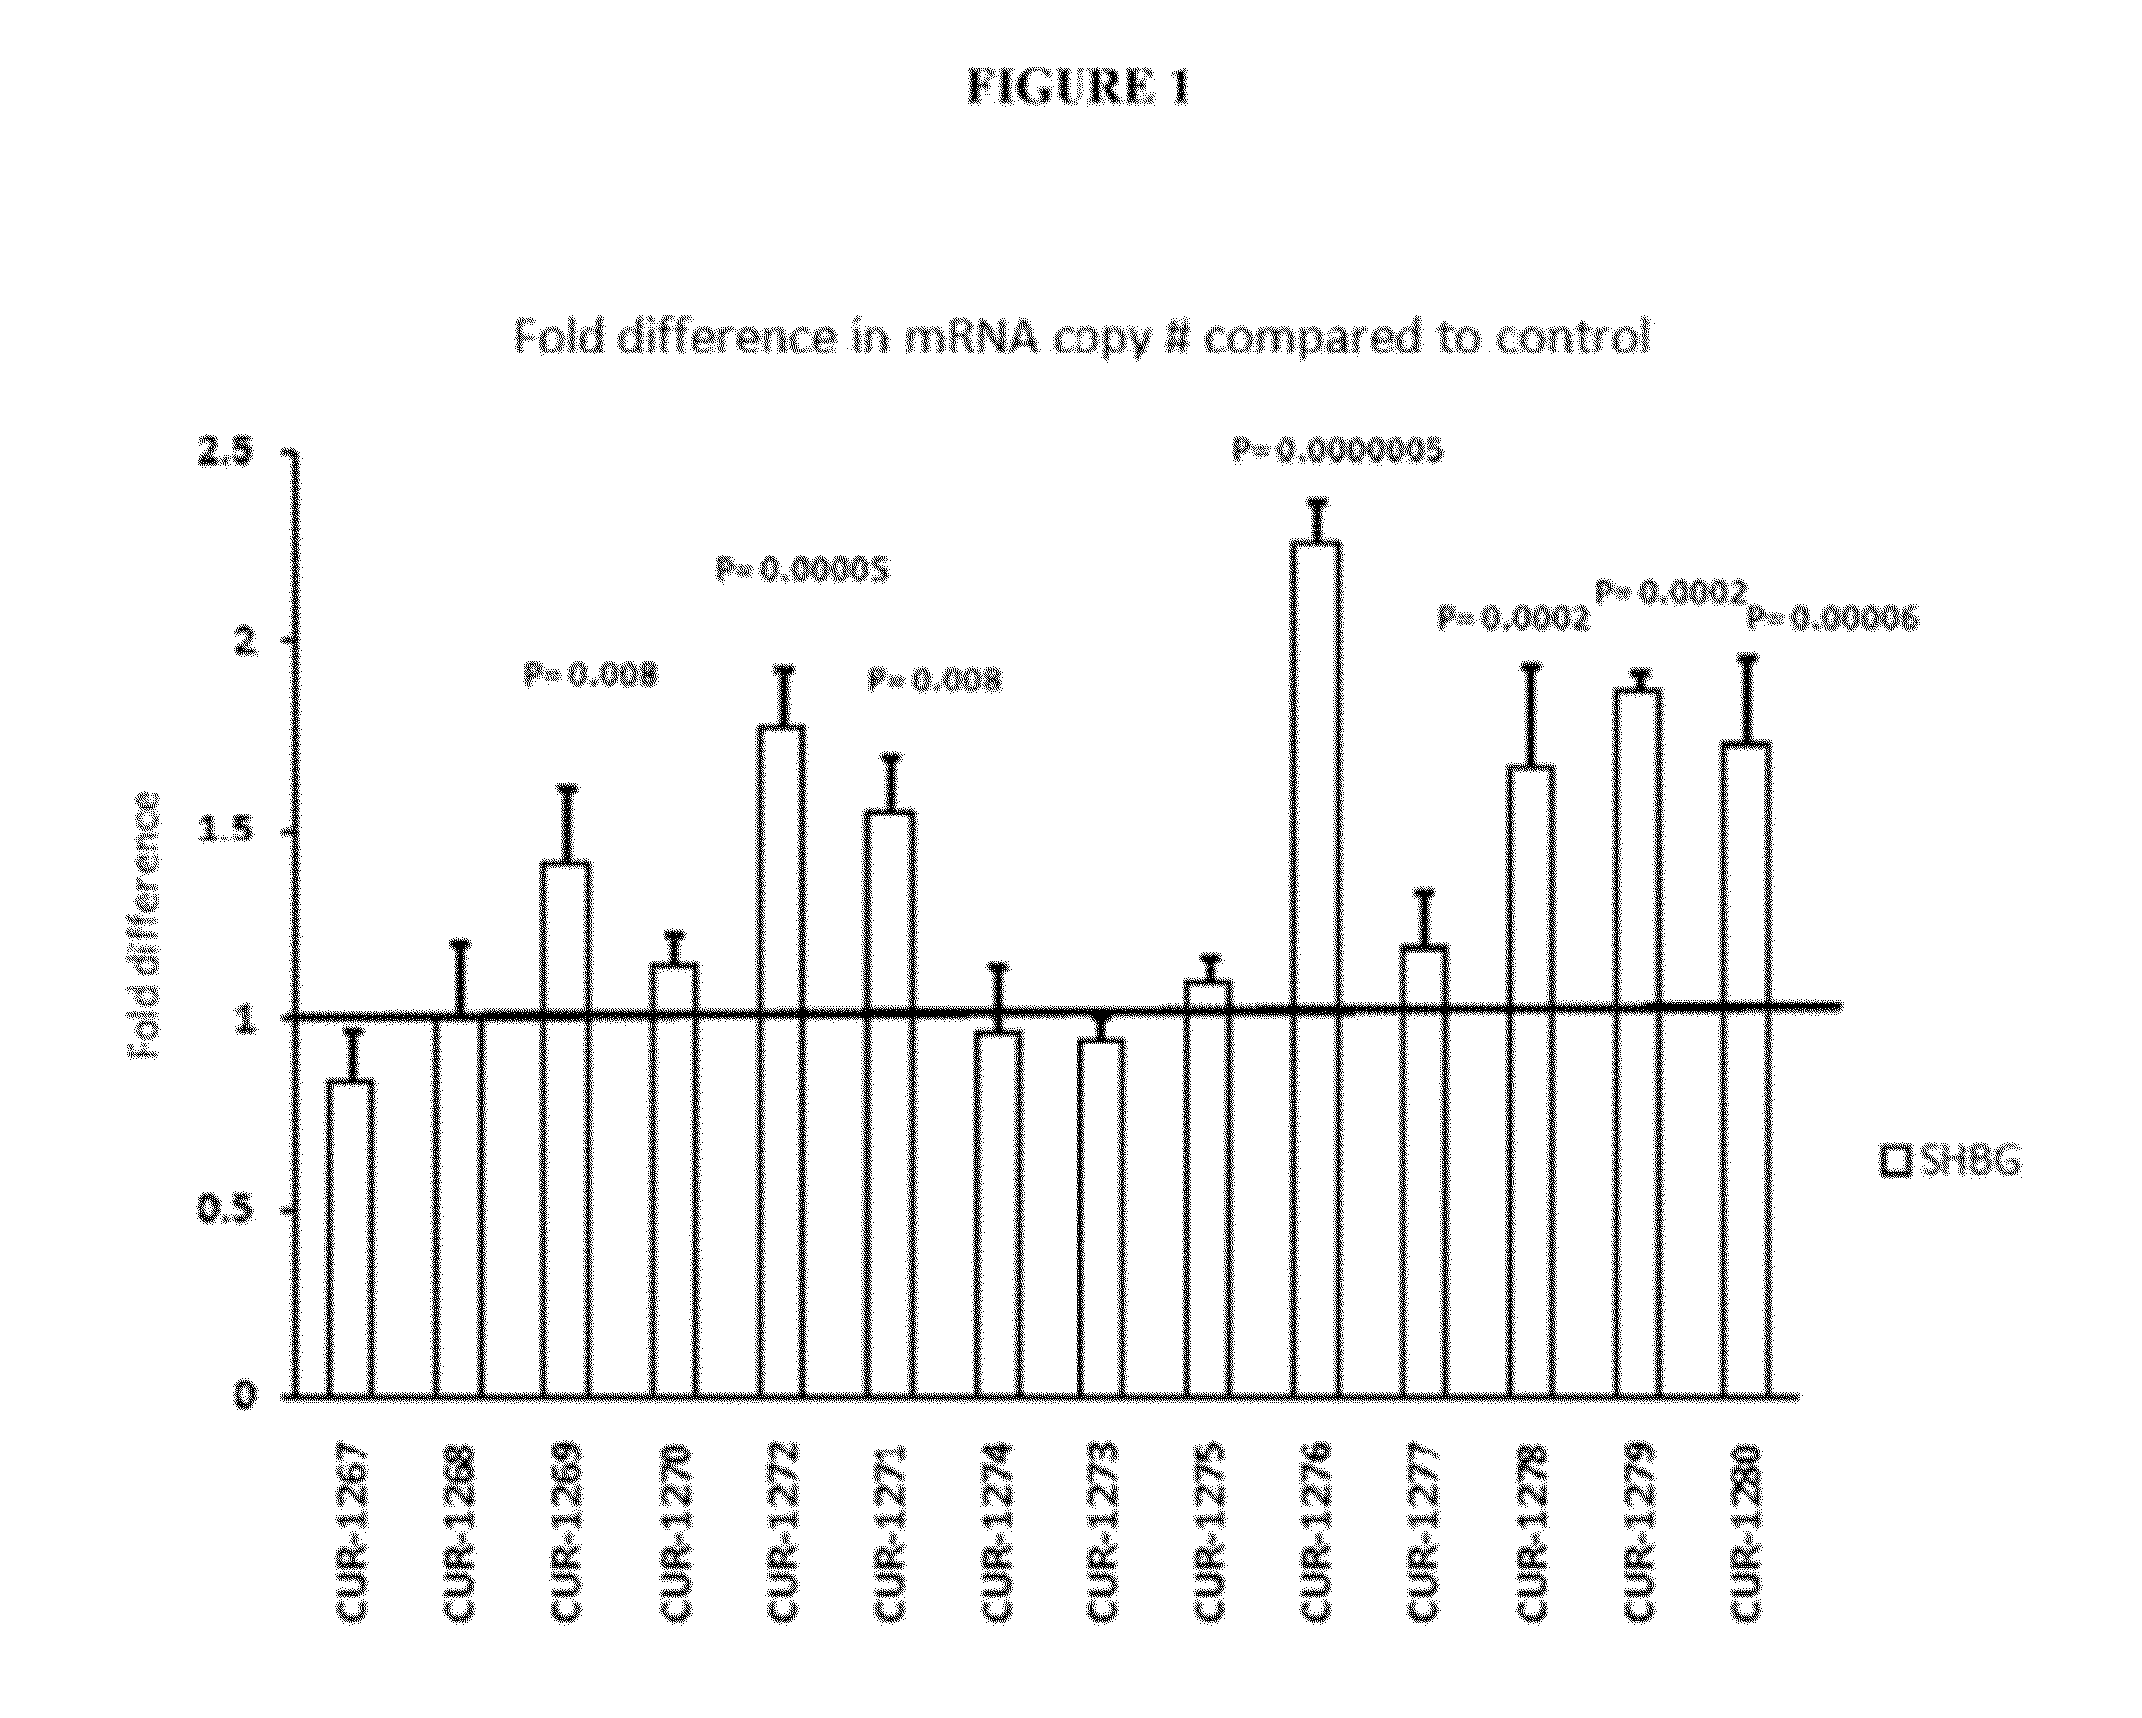 Treatment of sex hormone binding globulin (SHBG) related diseases by inhibition of natural antisense transcript to shbg